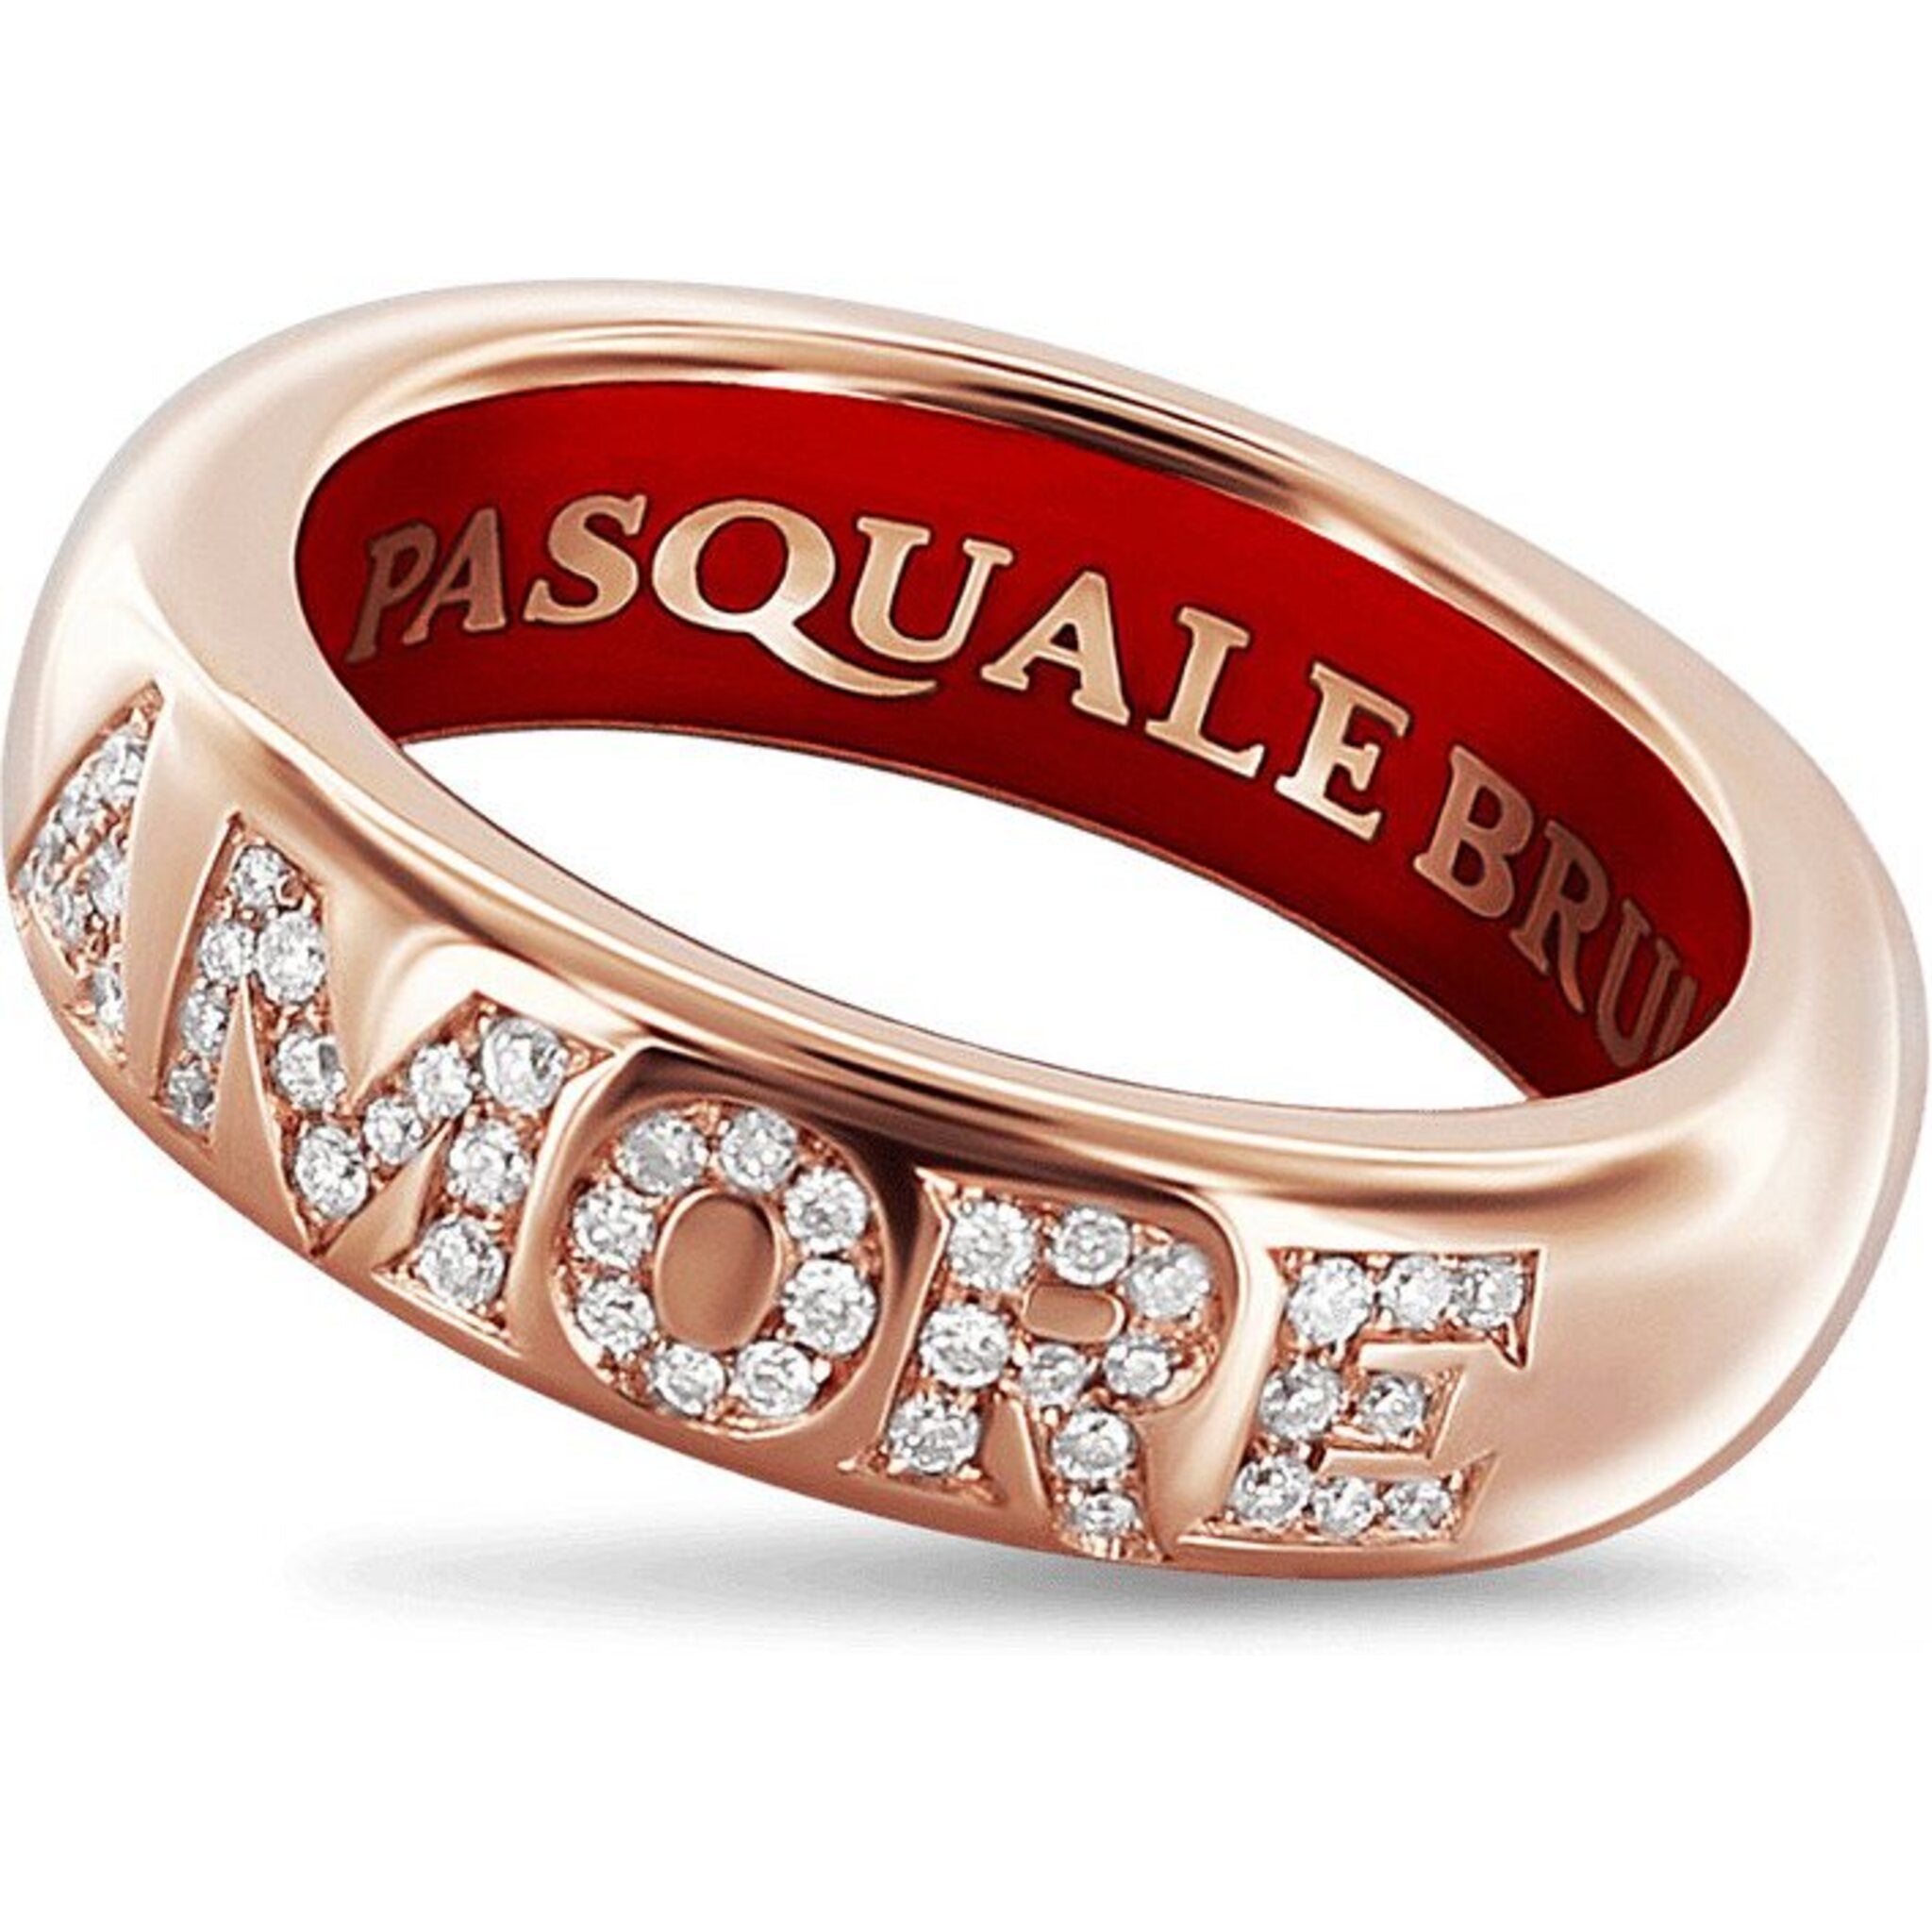 Pasquale Bruni - Amore Small Band Ring in 18k Rose Gold with White